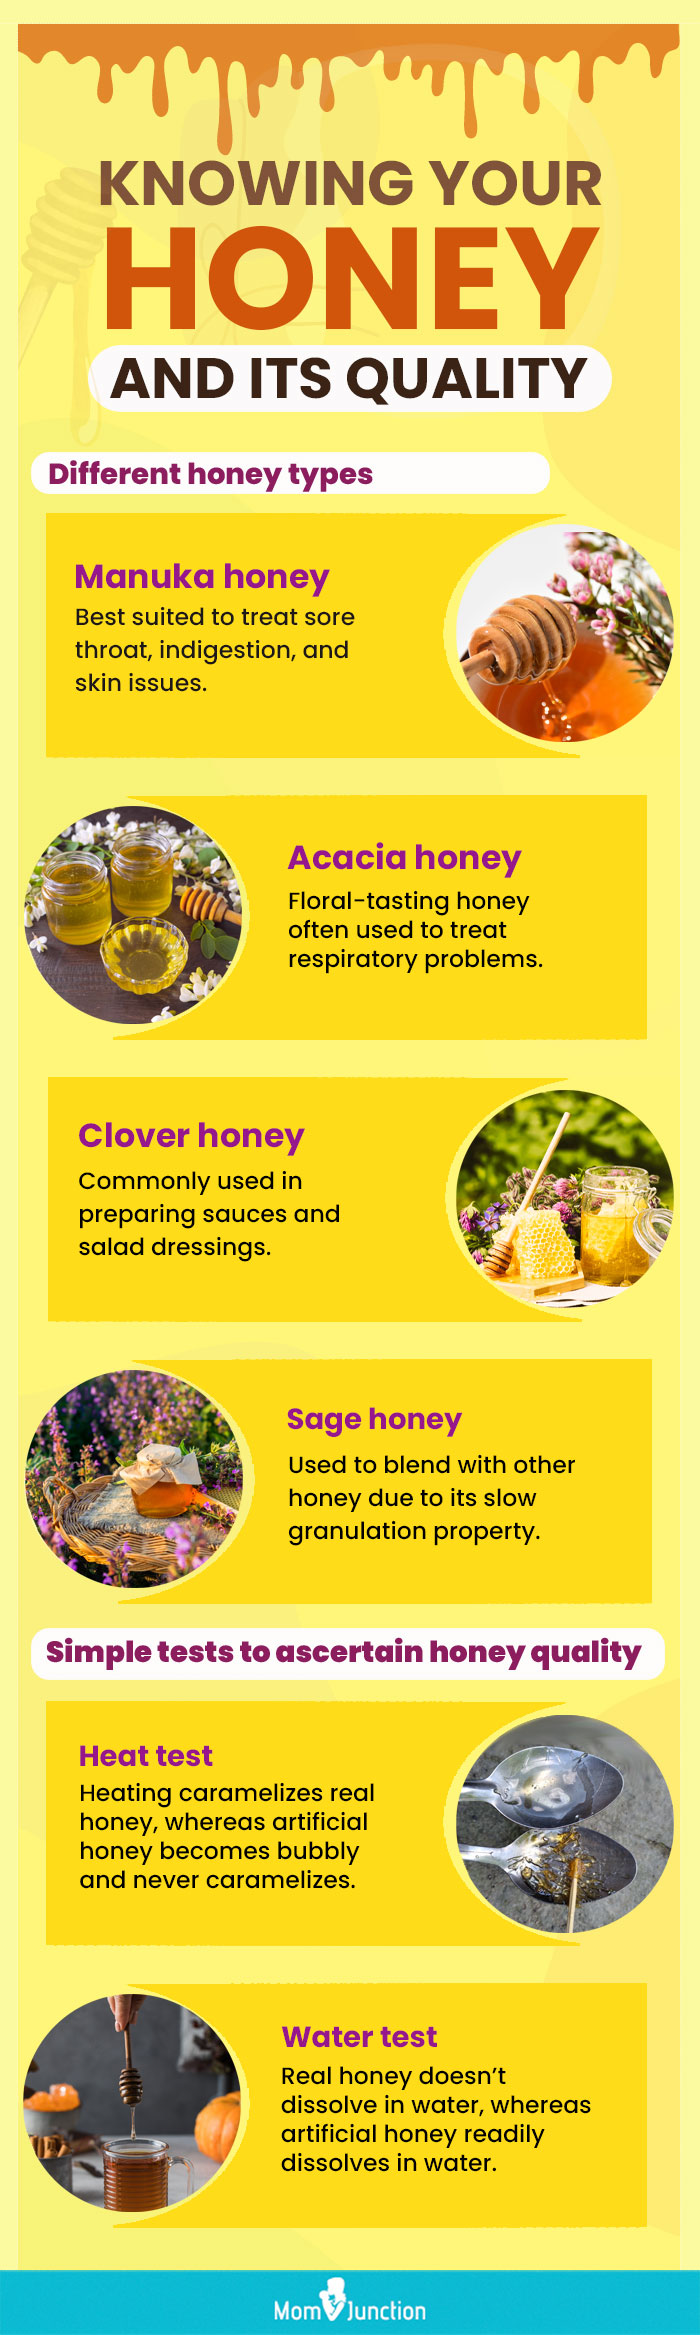 knowing your honey and its quality (infographic)